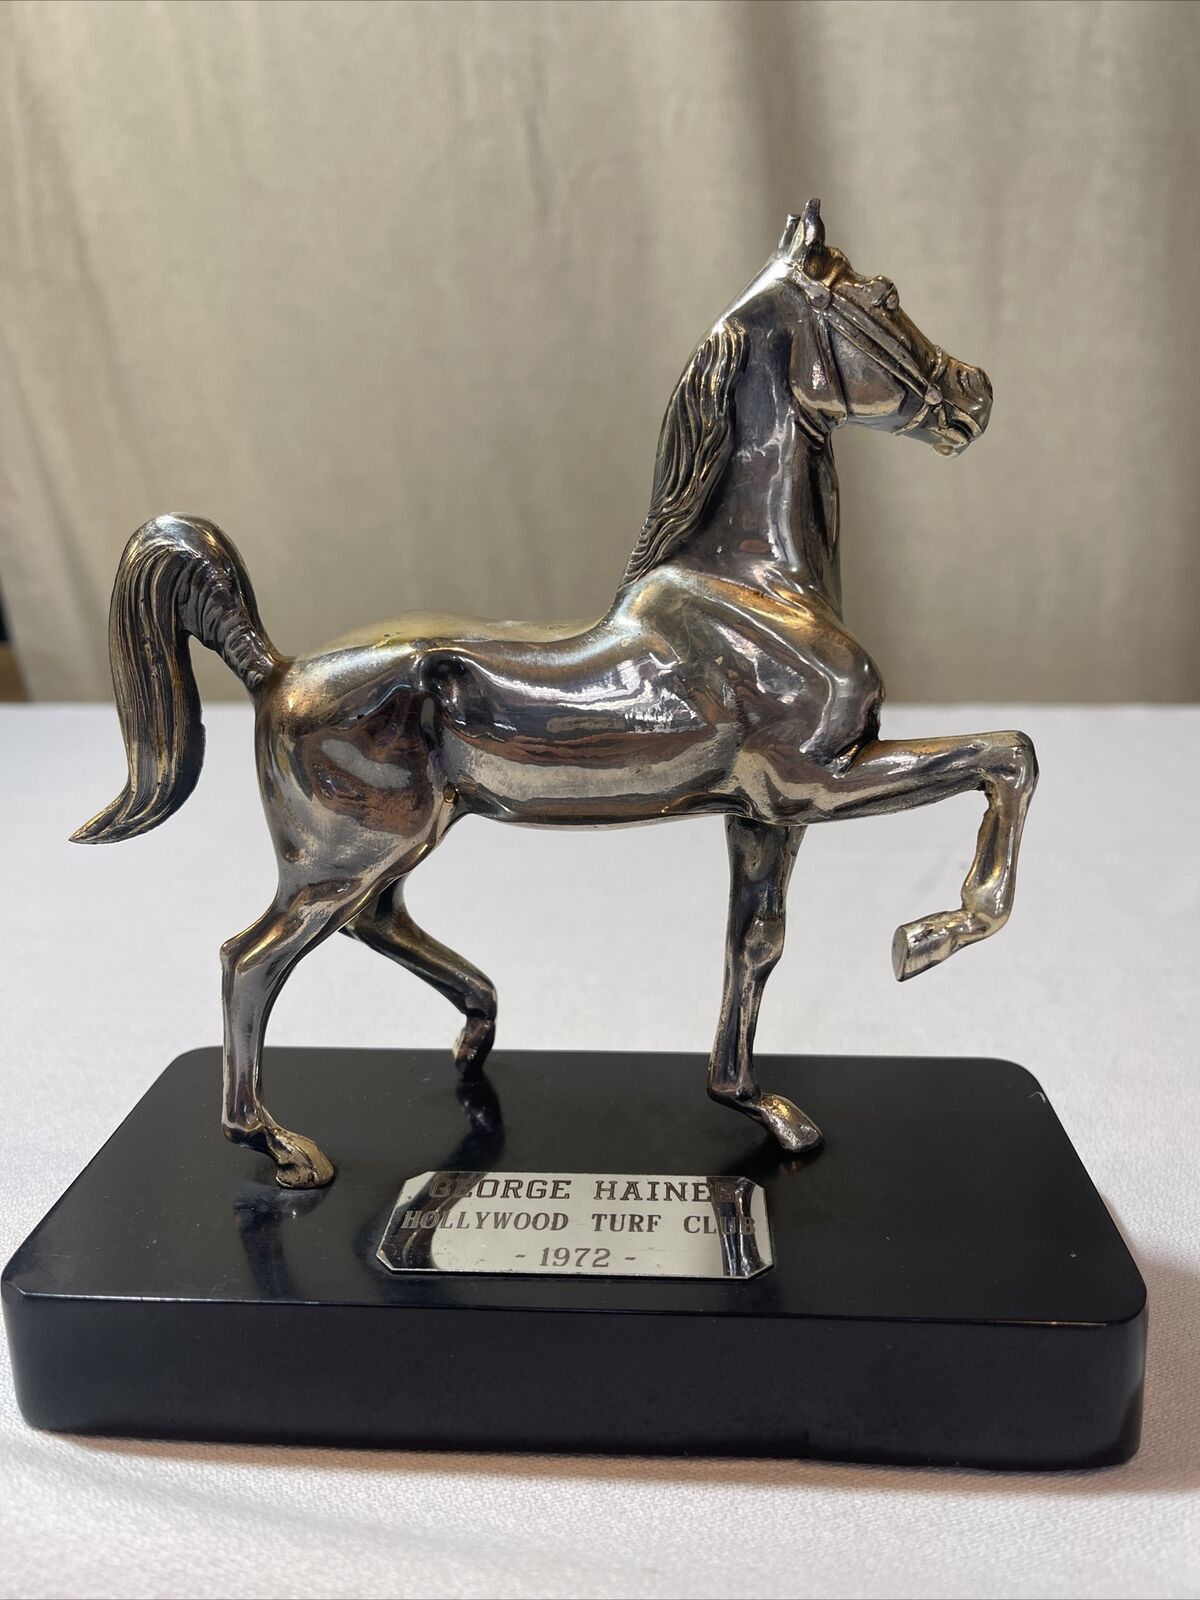 Vintage Brass Horse Statue on Marble Base George Haines Hollywood Turf Club 1972